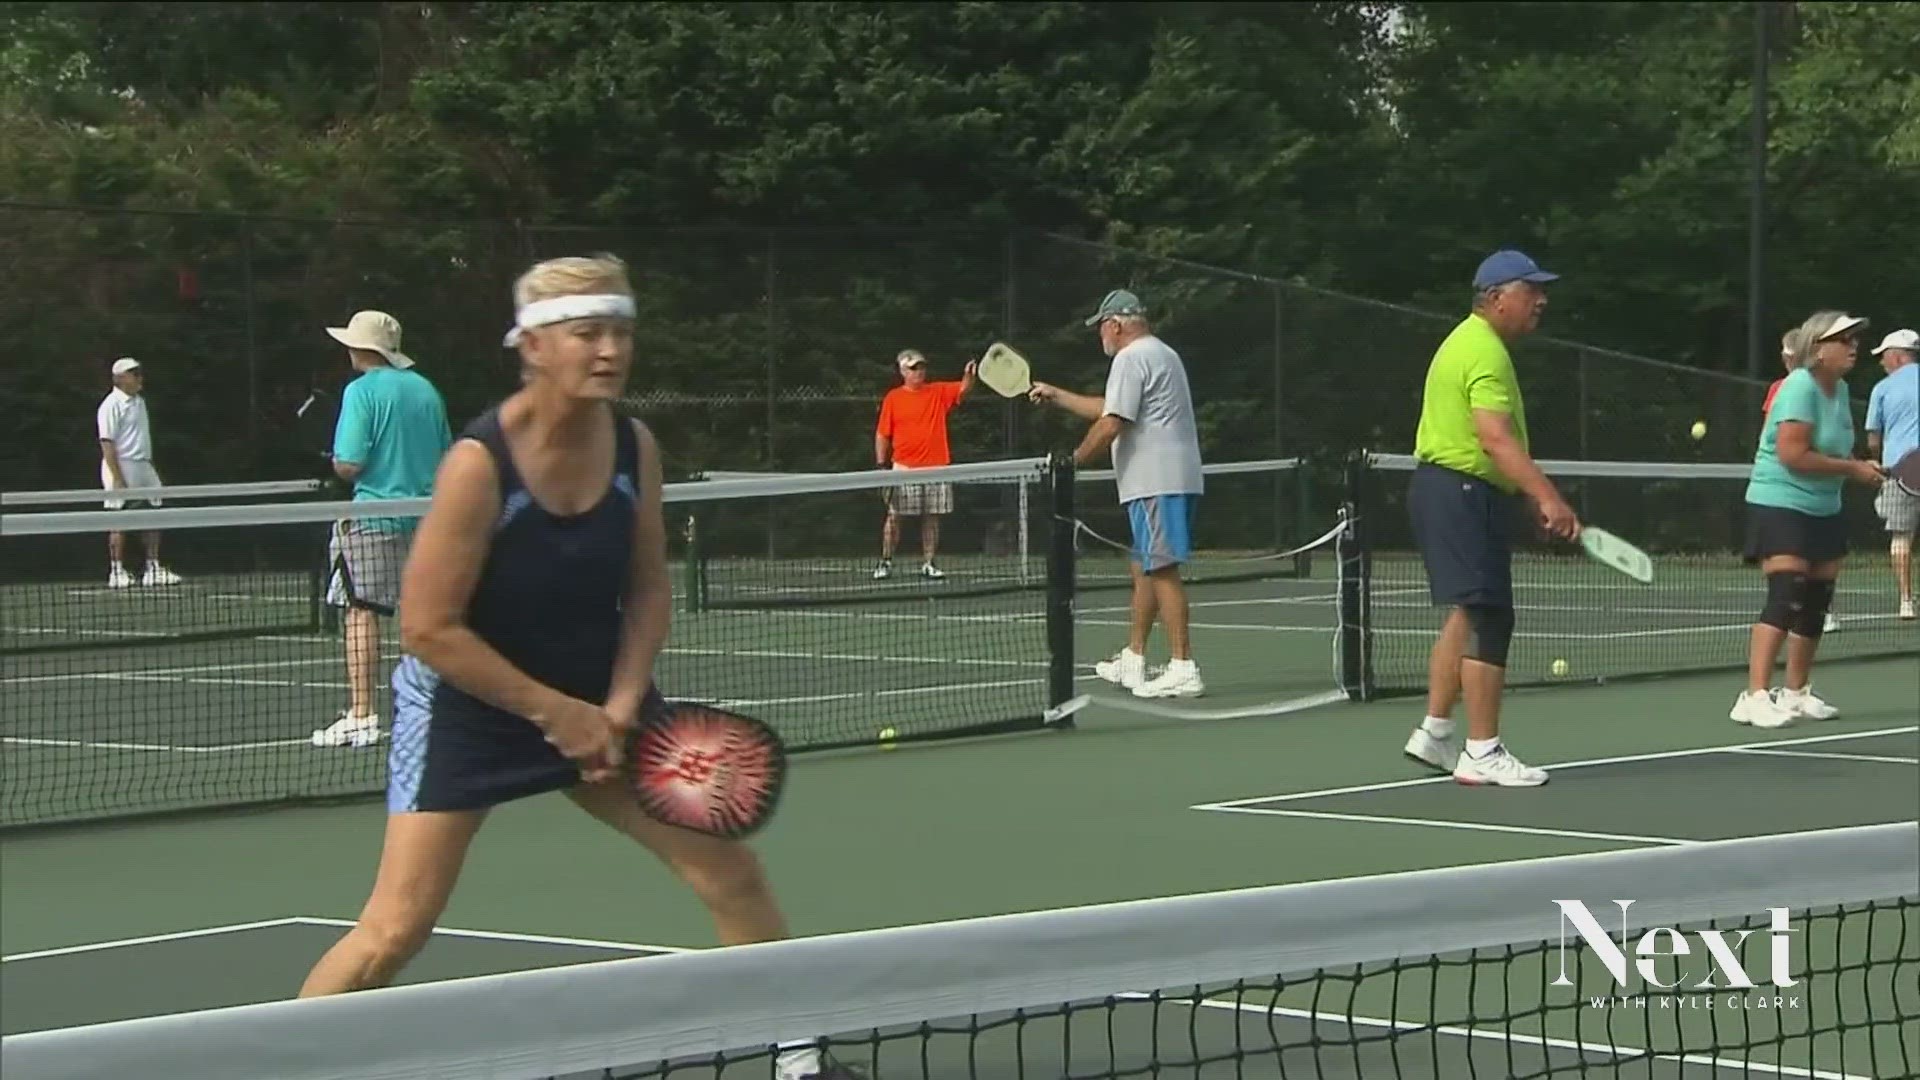 Centennial City Council met on pickleball again this week as they try to put rules in place to control the noise that's annoying neighbors.